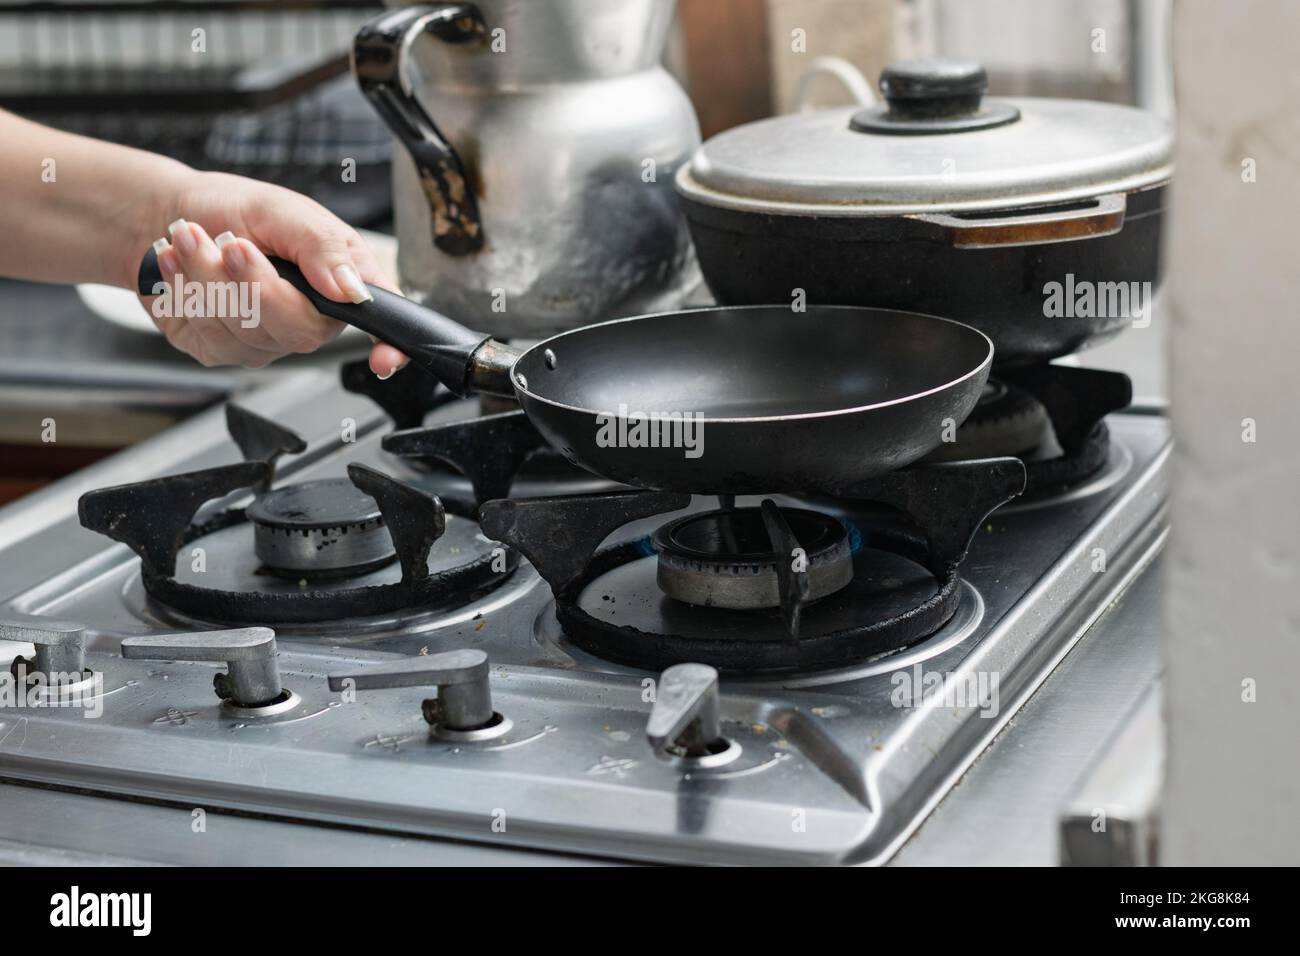 woman's hand placing a small frying pan on the burner of a gas stove to fry an egg. Stock Photo